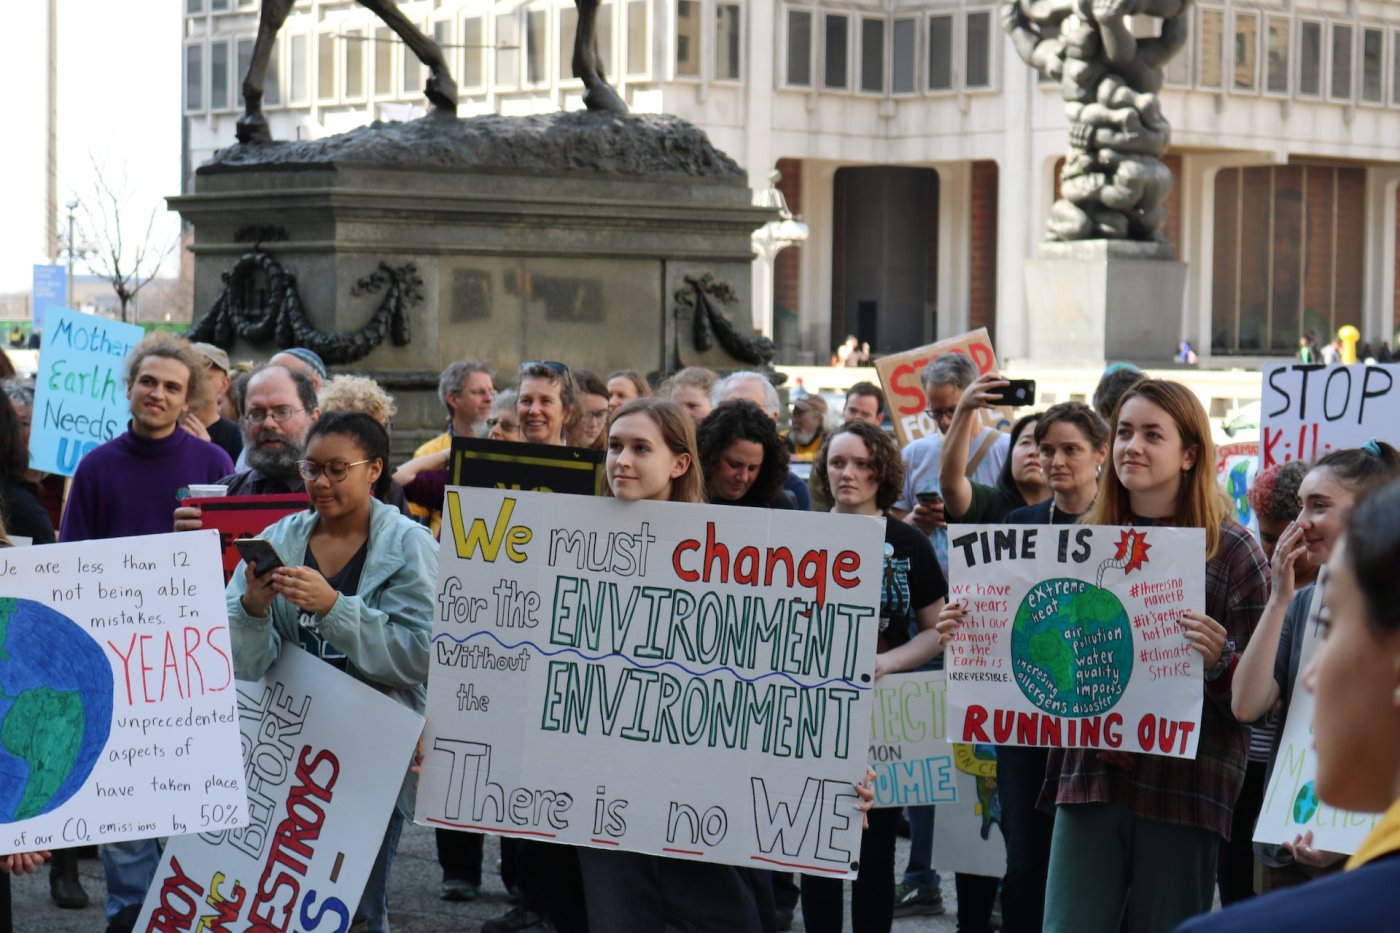 A crowd of people holding climate protest signs. One reads "We must change for the environment, without the environment there is no we." another says "time is running out".